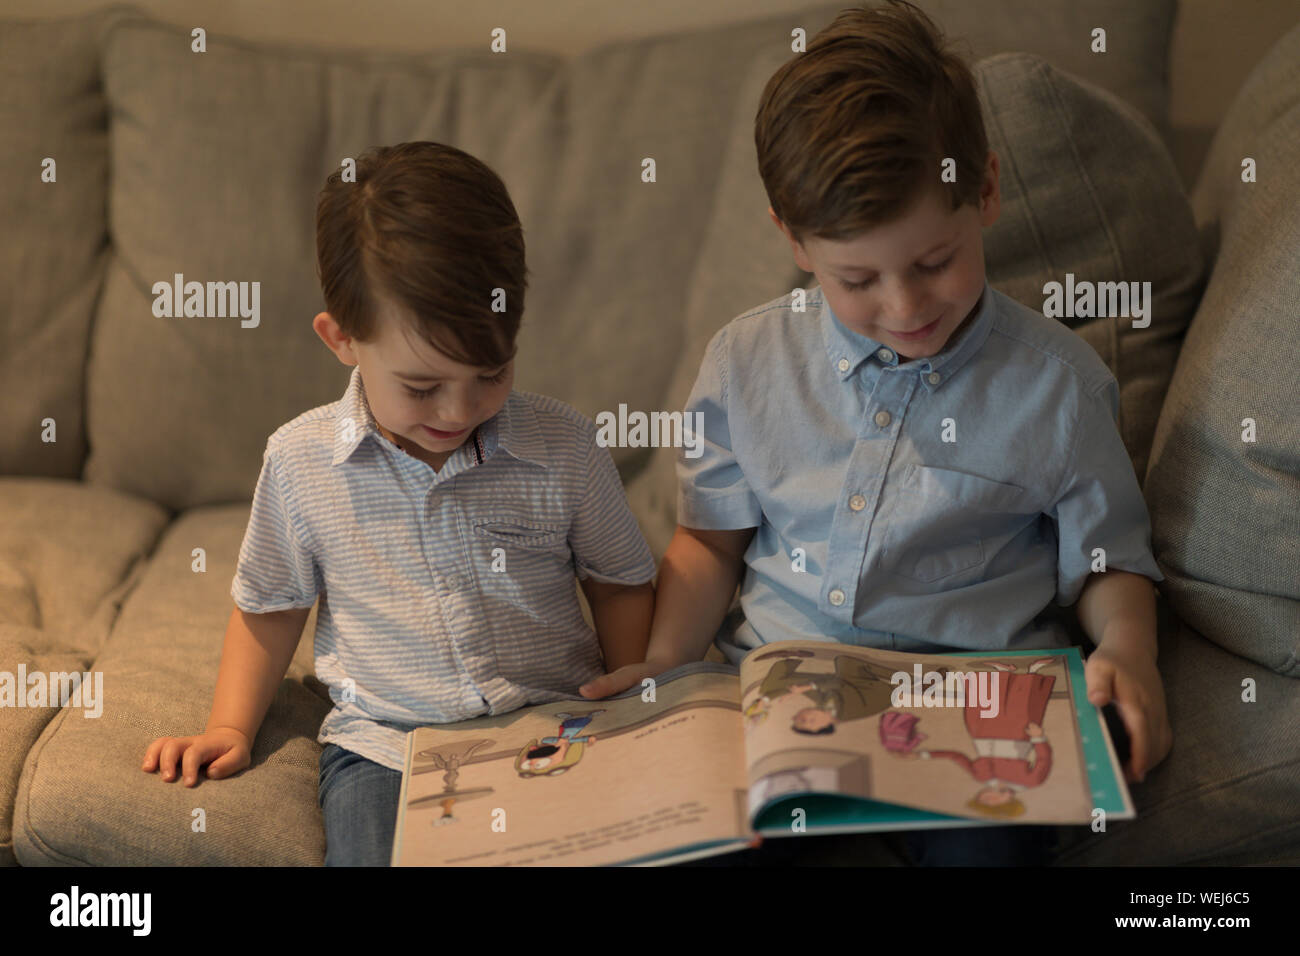 Two brothers, 2 and 4, sitting on sofa looking at book together, Clearwater, Florida Stock Photo